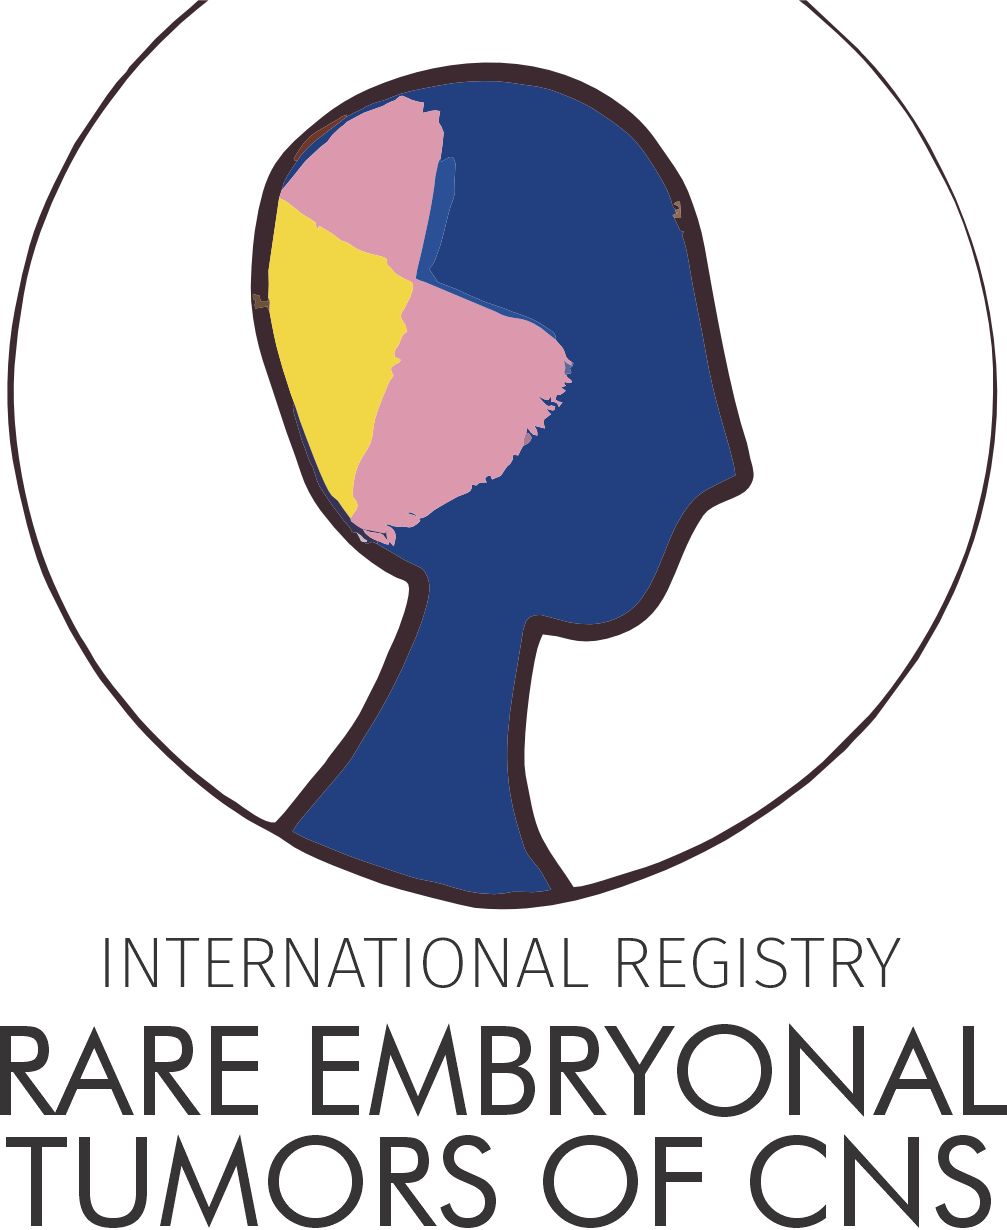 We invite you to join our mission to build international dataset and raise awareness about these rare diseases – Rare Embryonal Tumors of the CNS International Registry